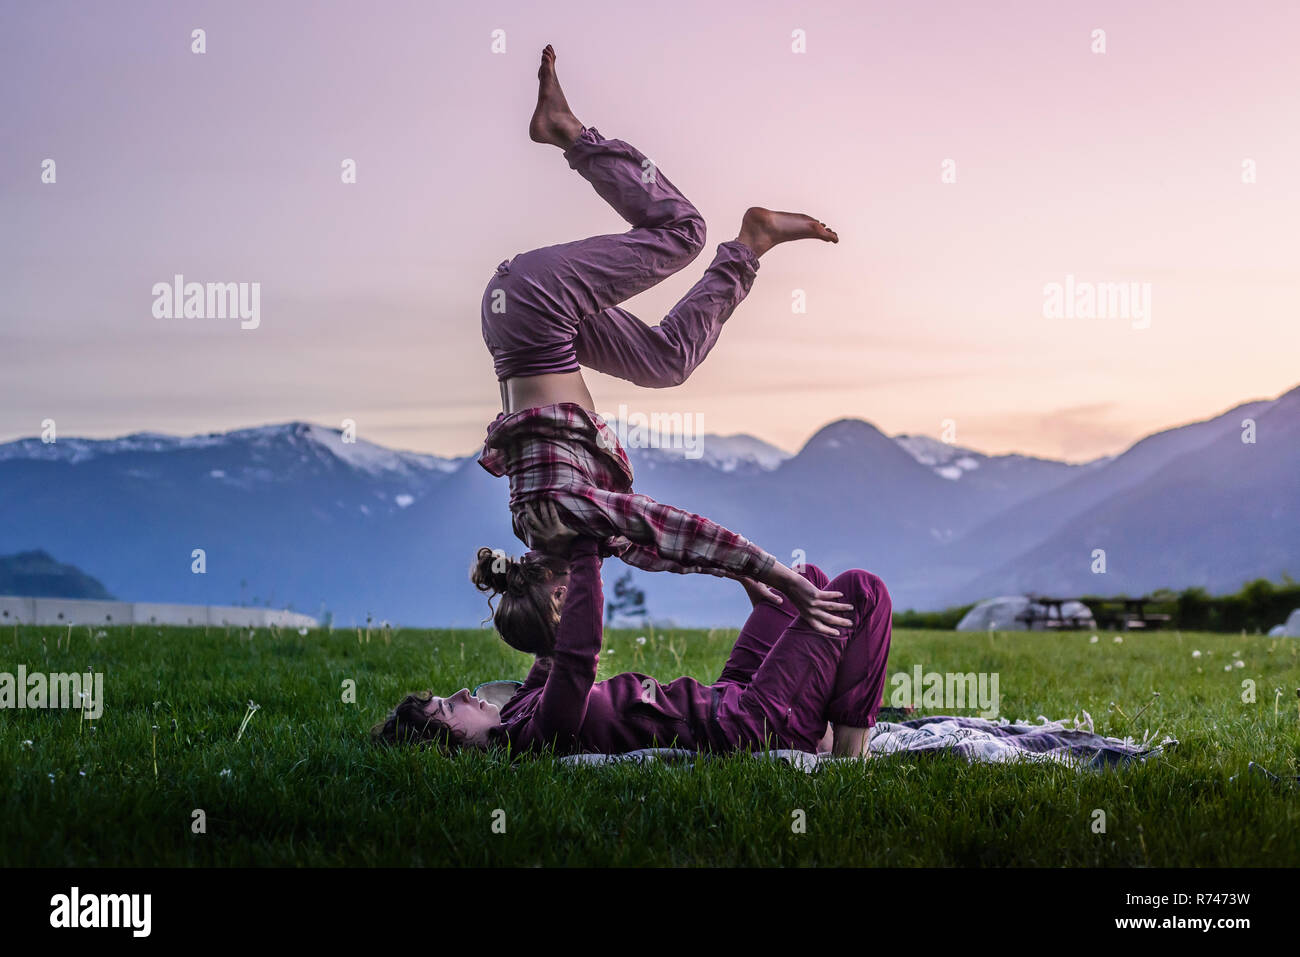 Two young women practicing acroyoga on grass in front of mountain range at sunset, Squamish, British Columbia, Canada Stock Photo